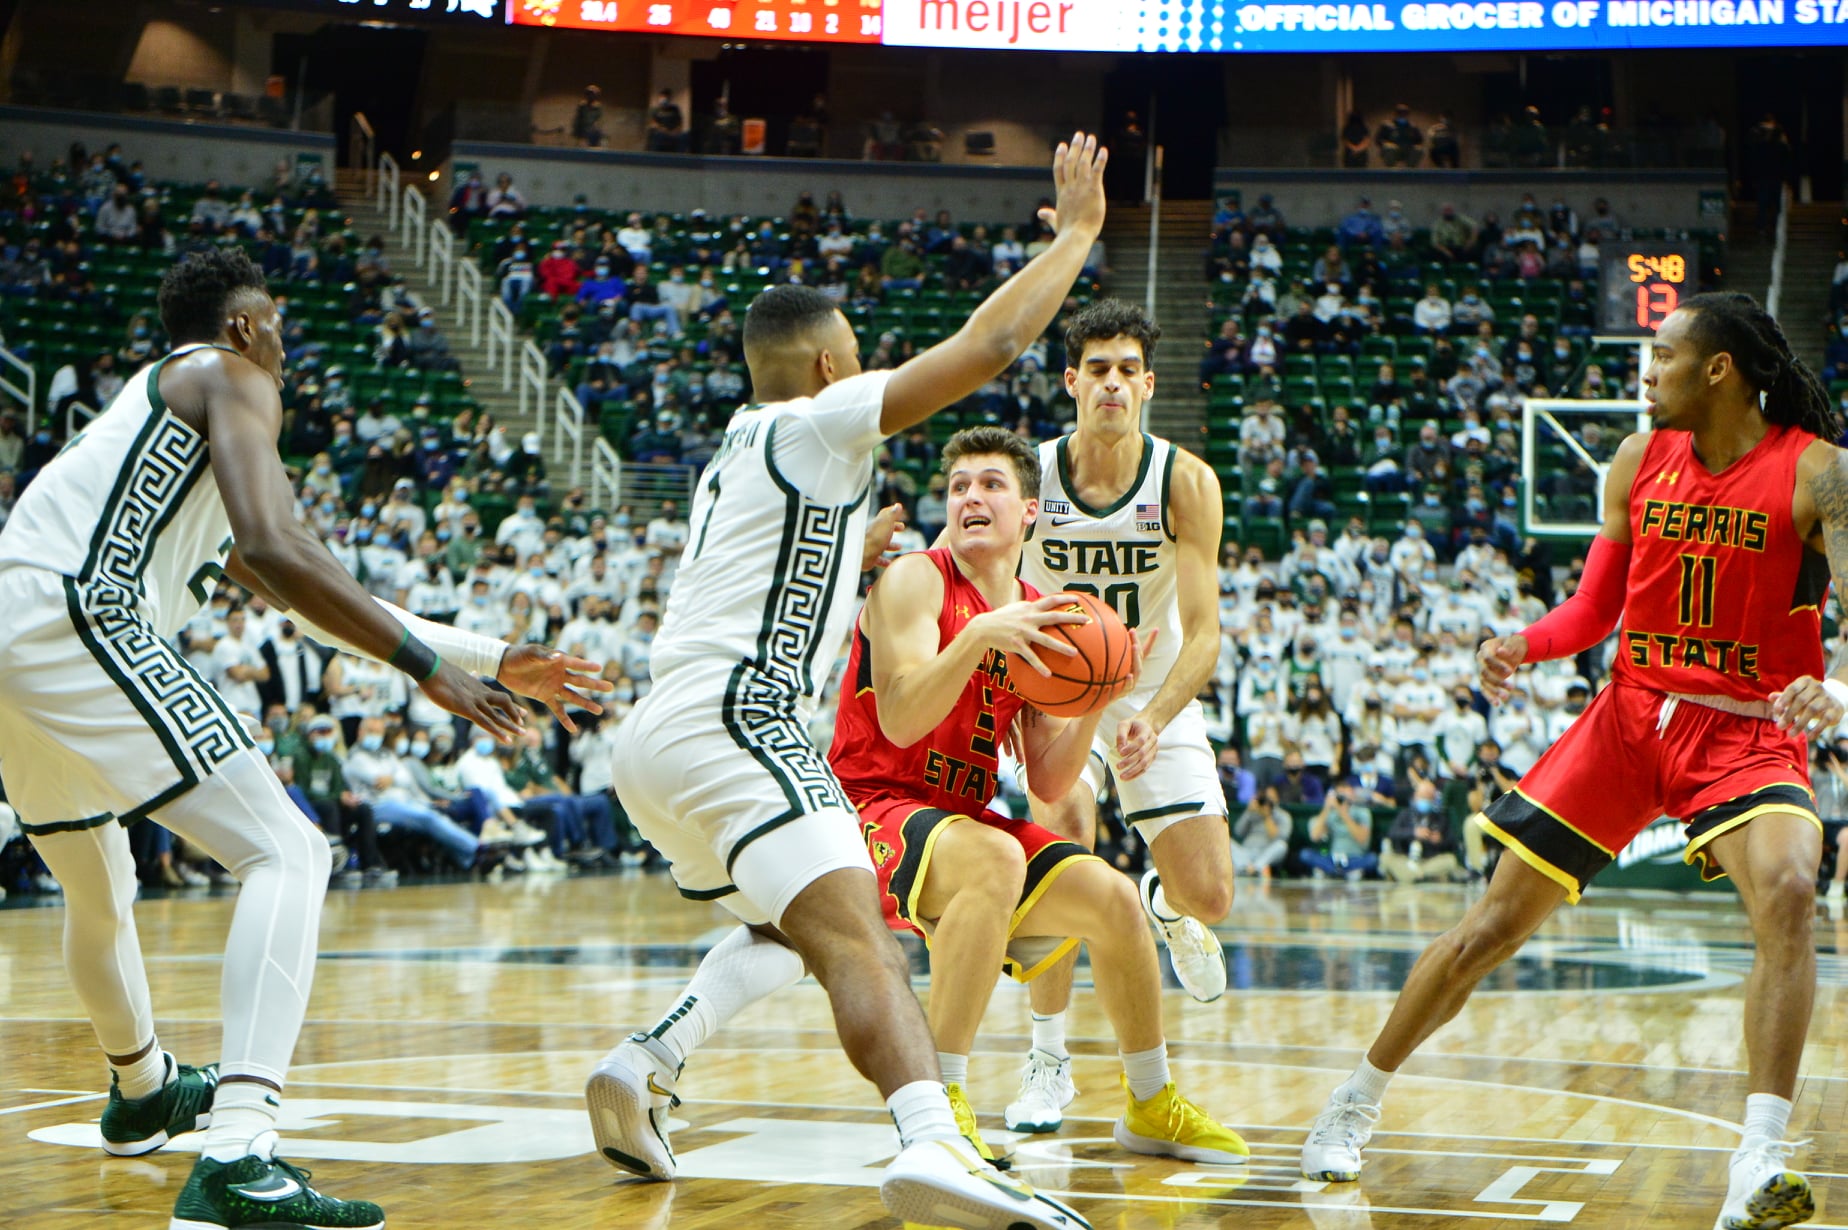 Ferris State Falls In Exhibition Opener Against Michigan State At The Breslin Center